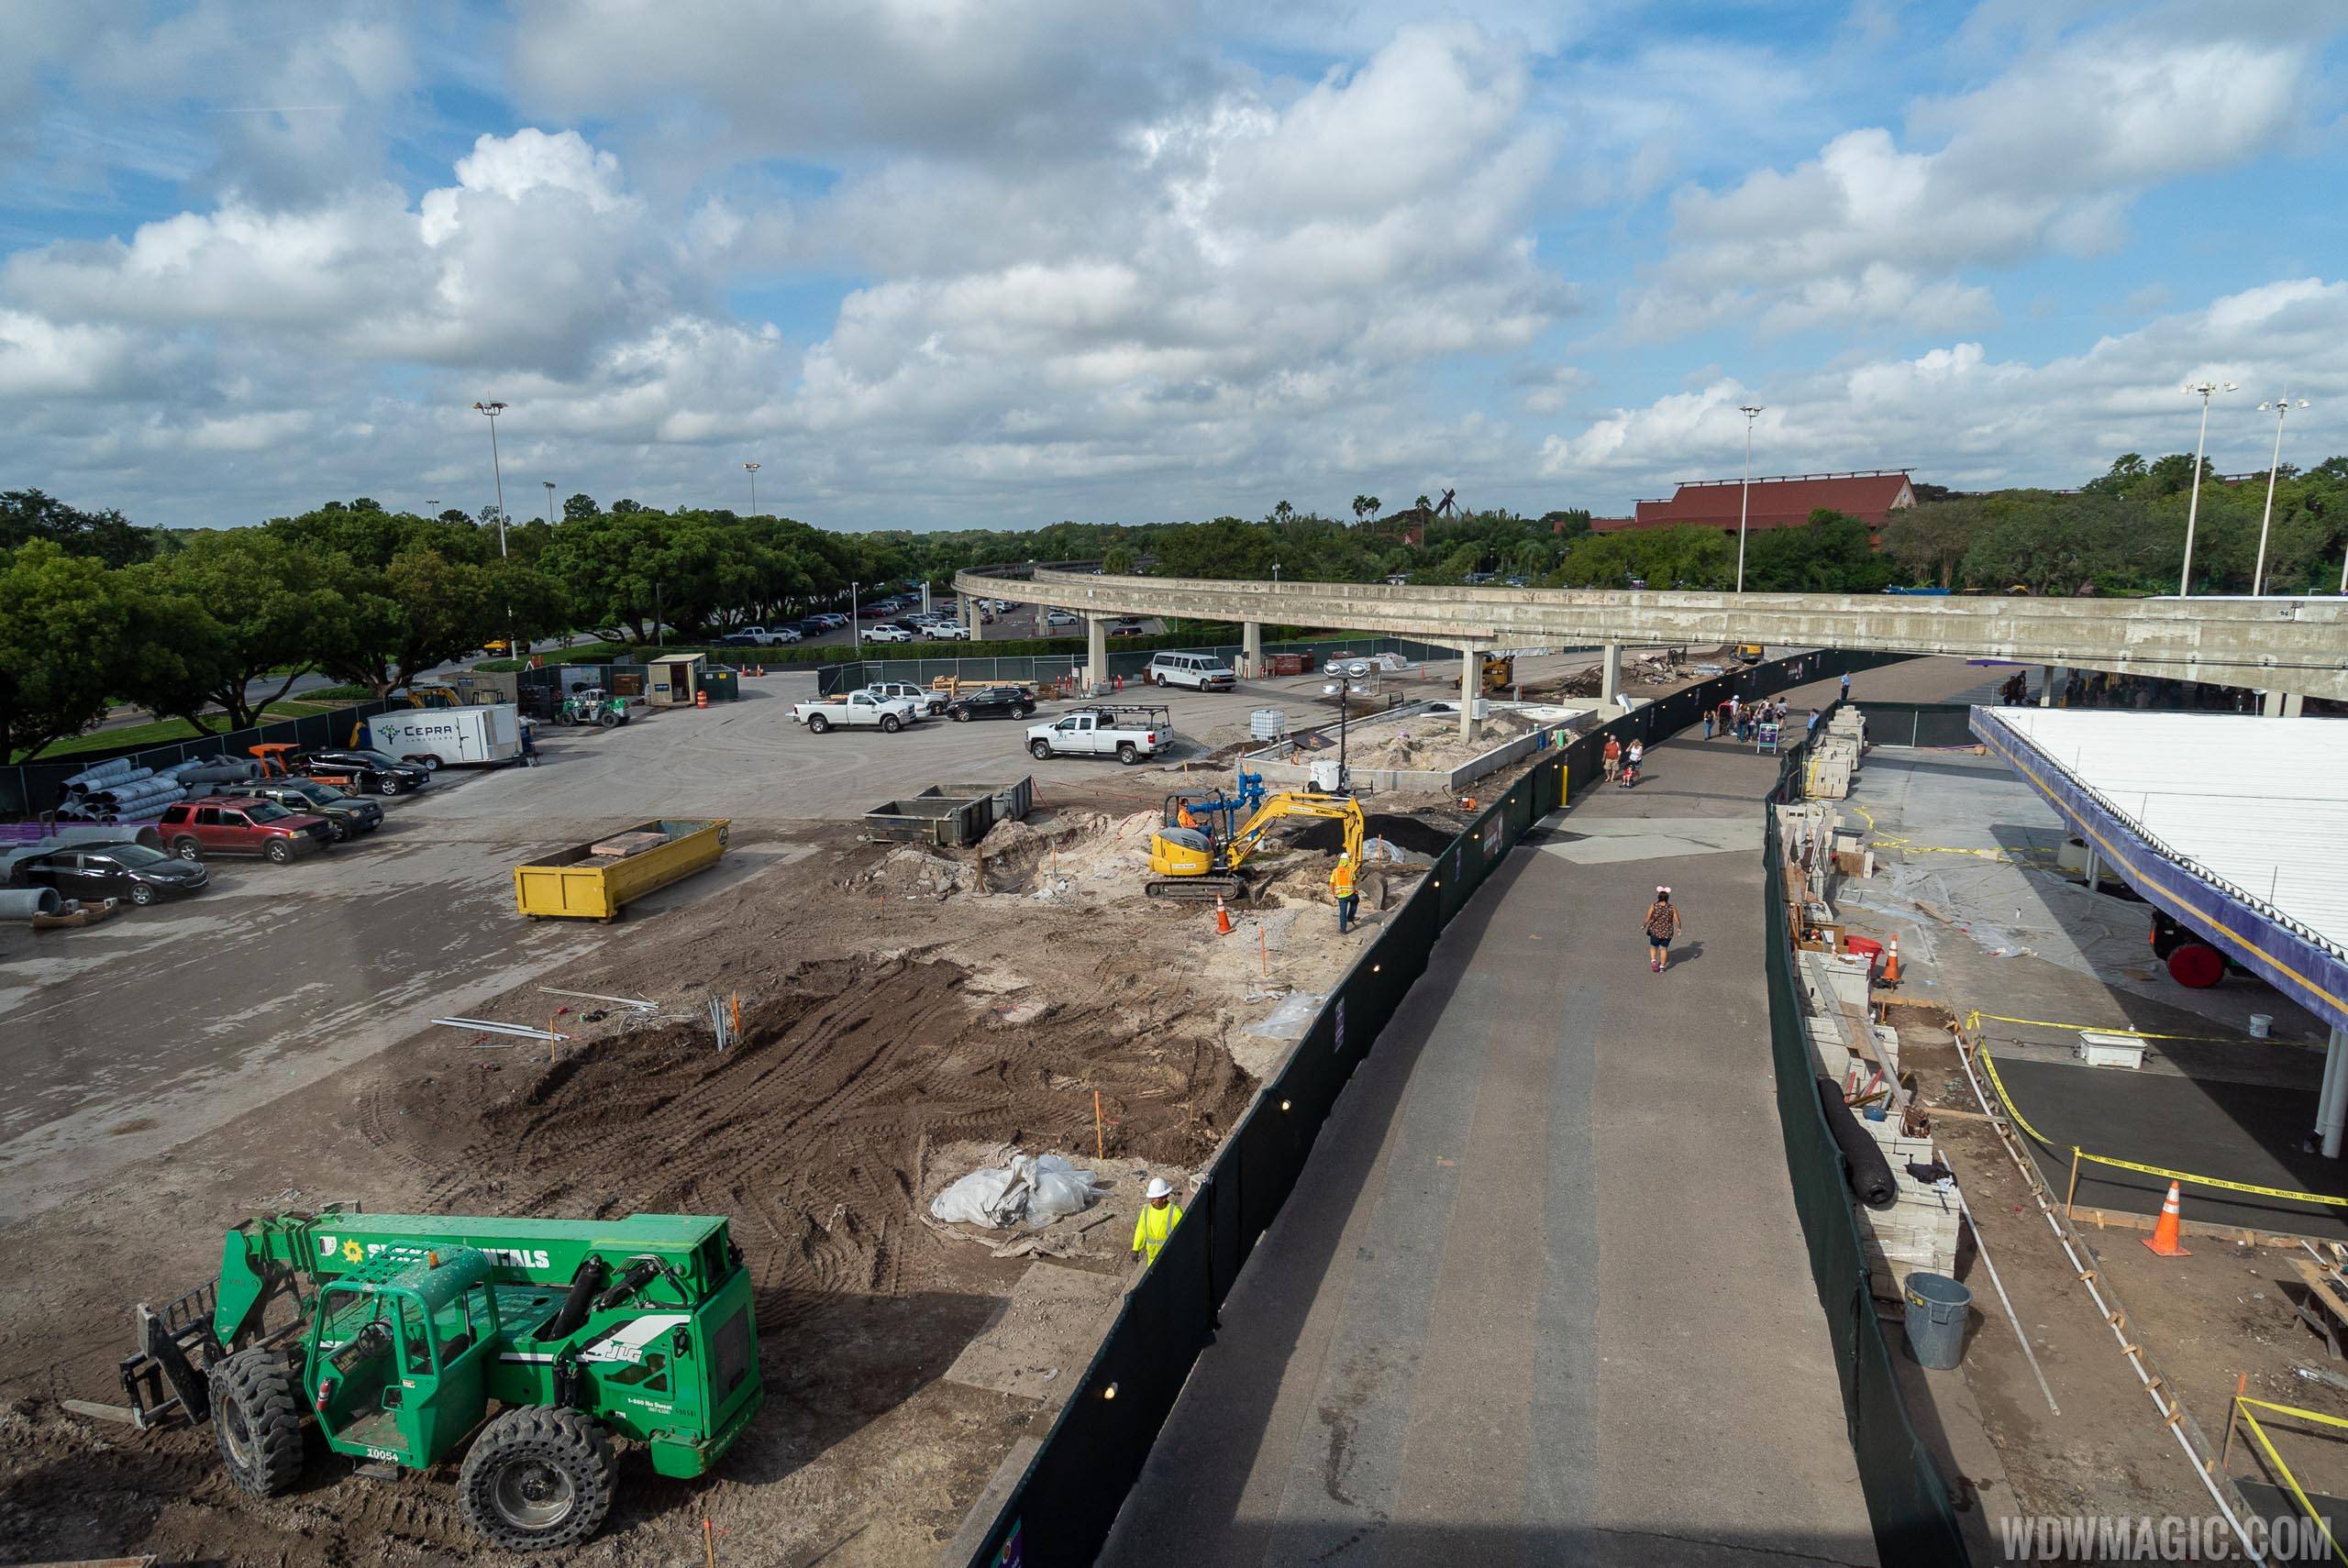 PHOTOS - Construction update from the Transportation and Ticket Center